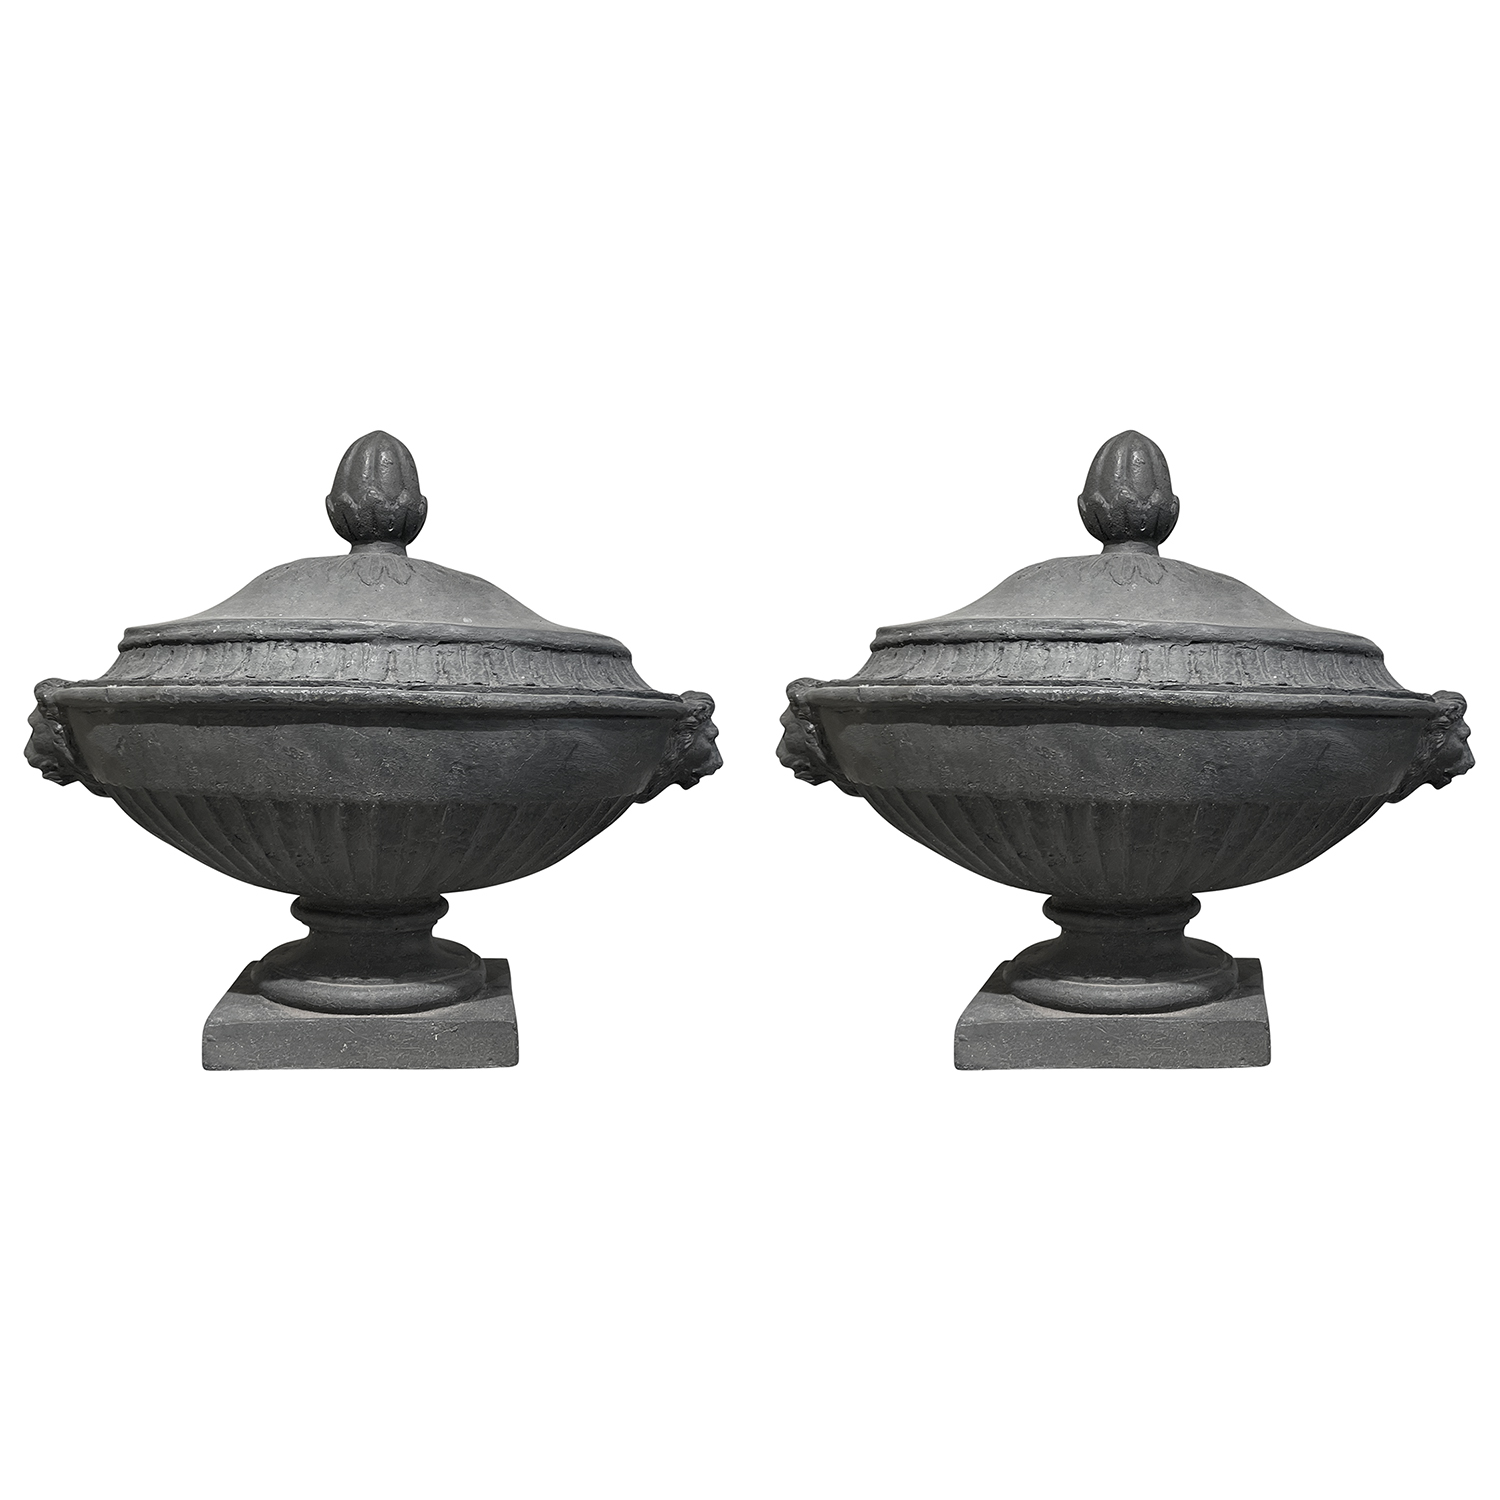 19th Century English Pair of Antique Neoclassical Lead Urns